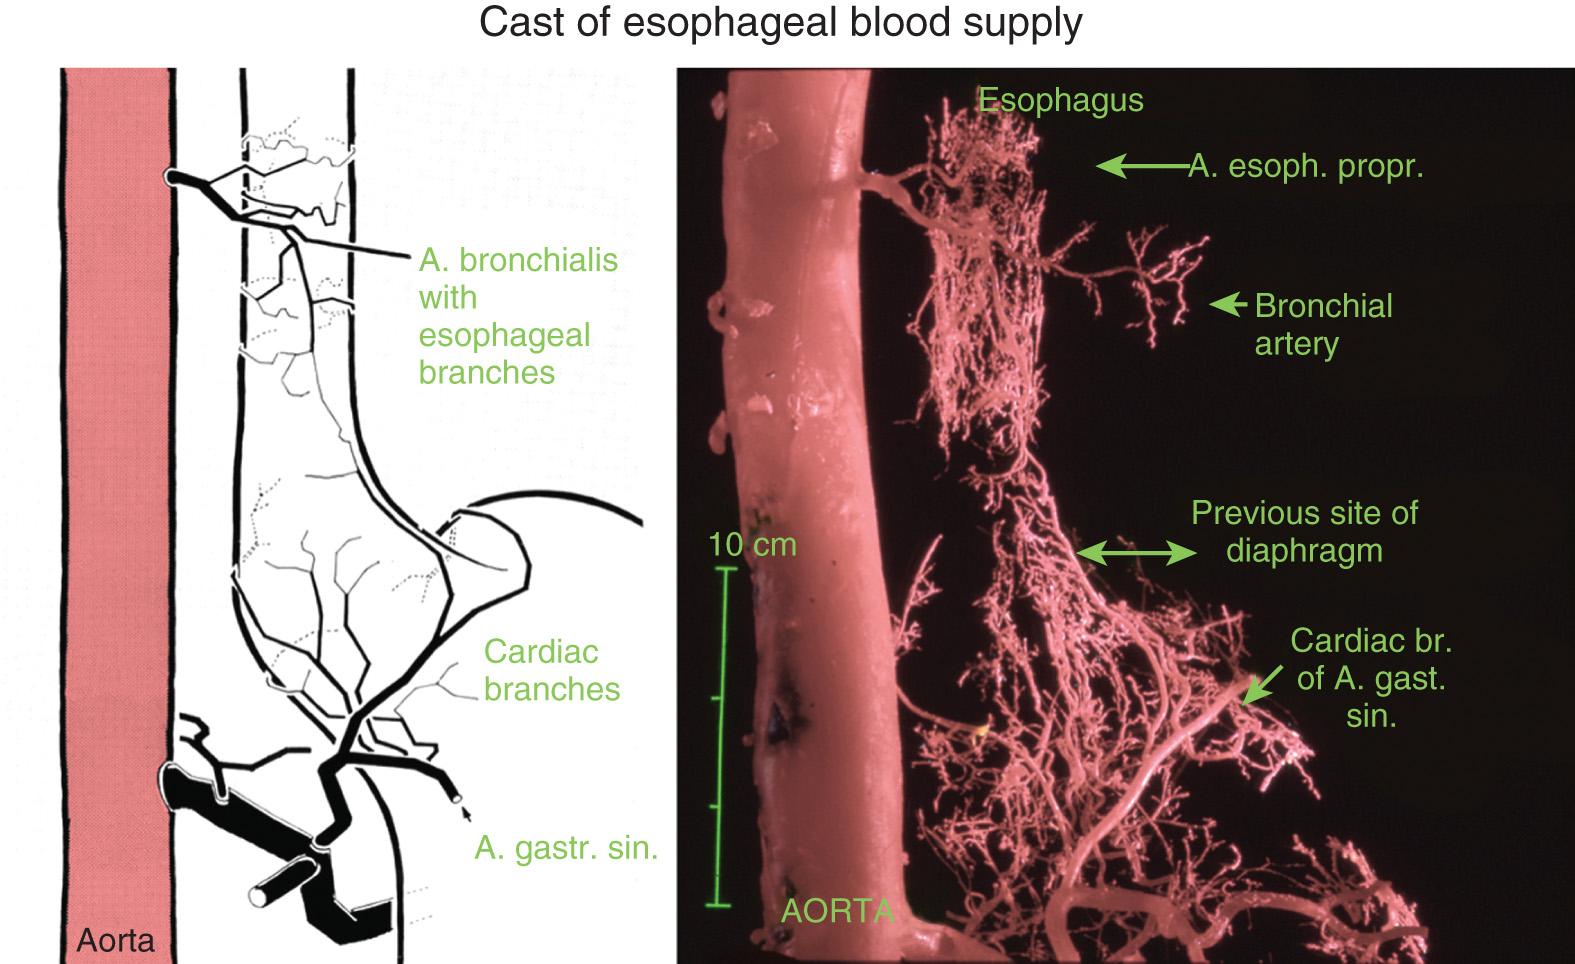 FIGURE 4.9, Arterial cast showing the vascular supply to the middle and lower esophagus. There is a rich intramural network of small vessels, allowing the mobilized esophagus to remain well perfused, even after extensive mobilization.